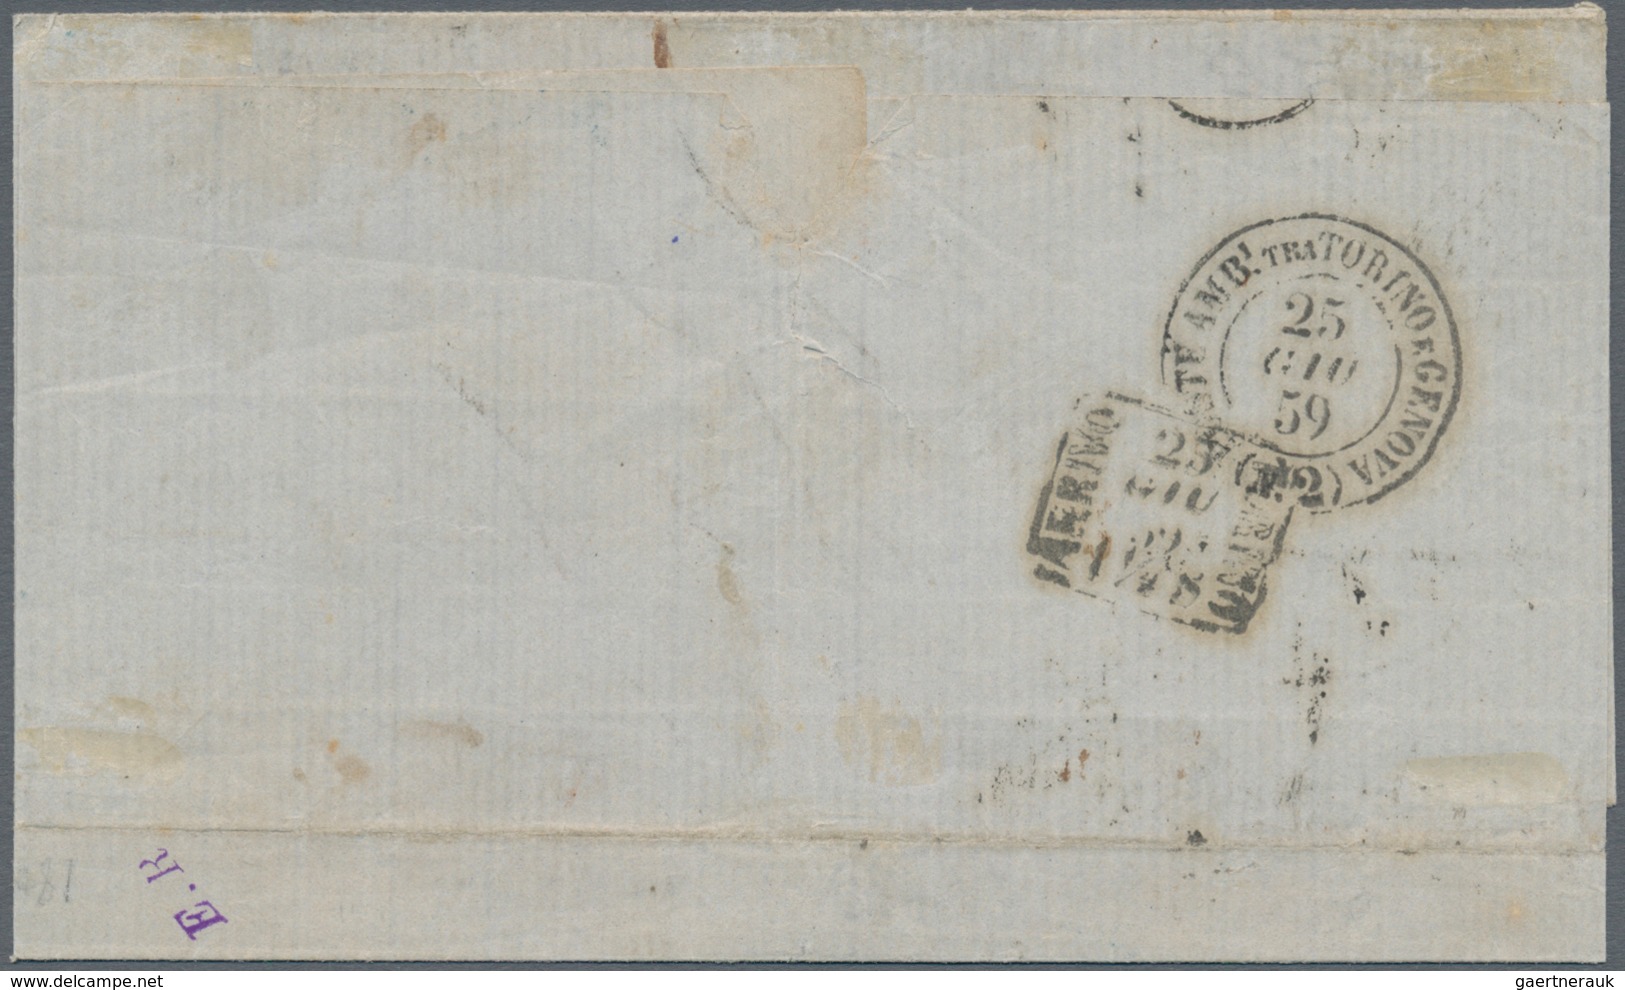 00870 Italien - Altitalienische Staaten: Sizilien: 1859: 20 Grana Gray And 2 Grana Blue, Both Tied By "hor - Sicily